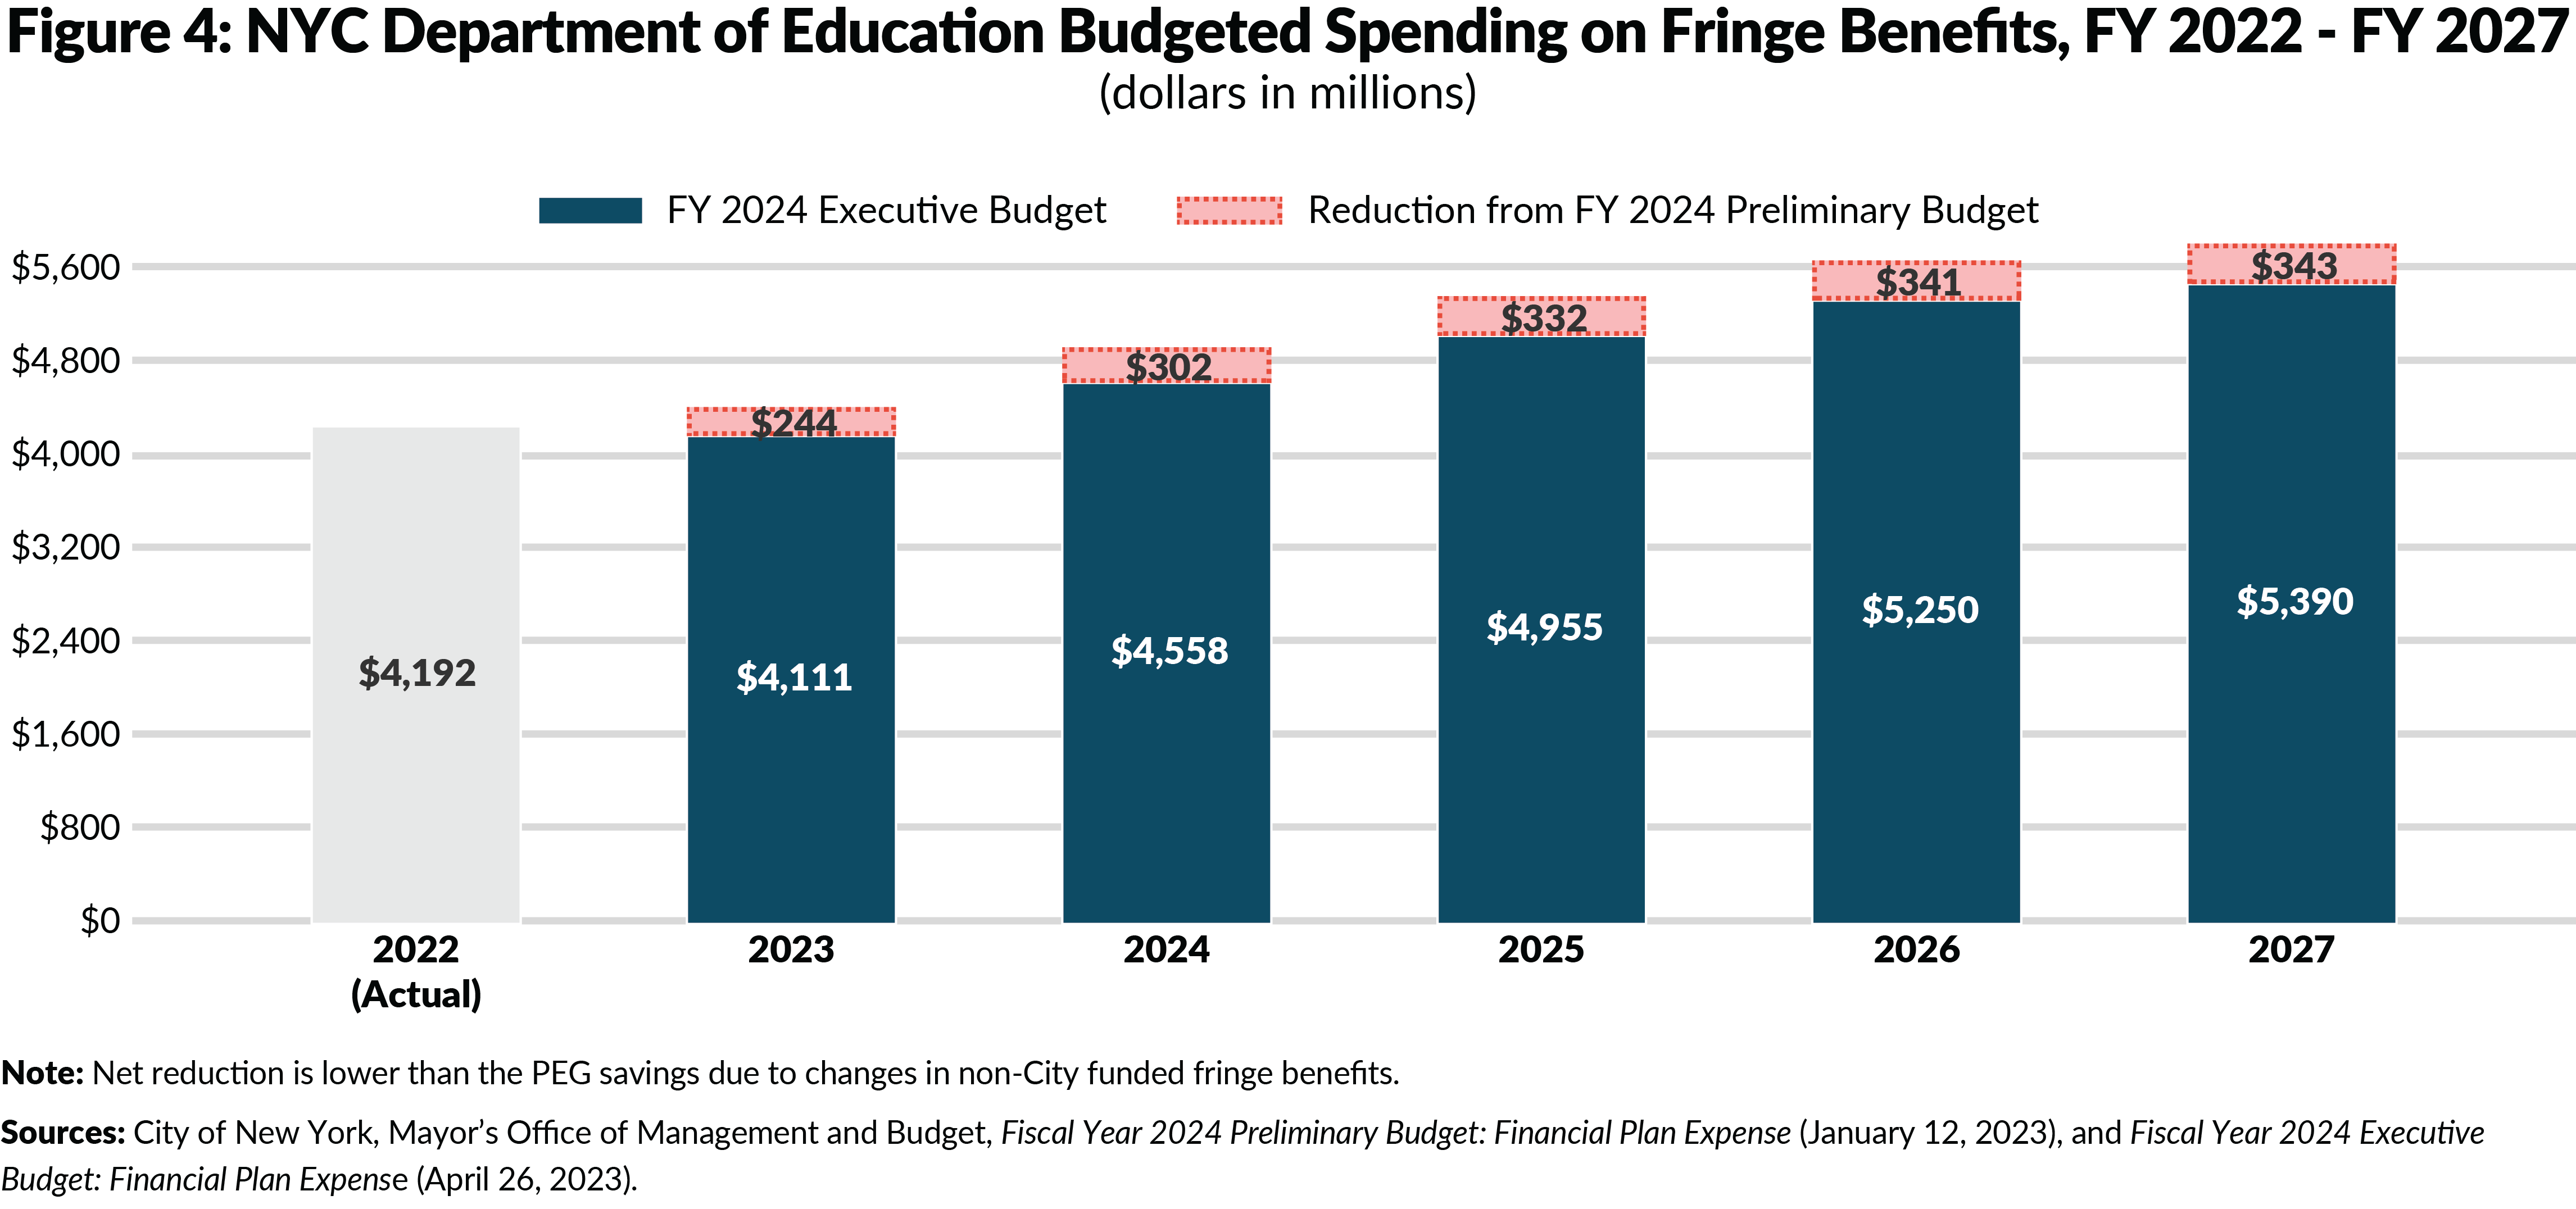 Figure 4: NYC Department of Education Budgeted Spending on Fringe Benefits (dollars in millions)